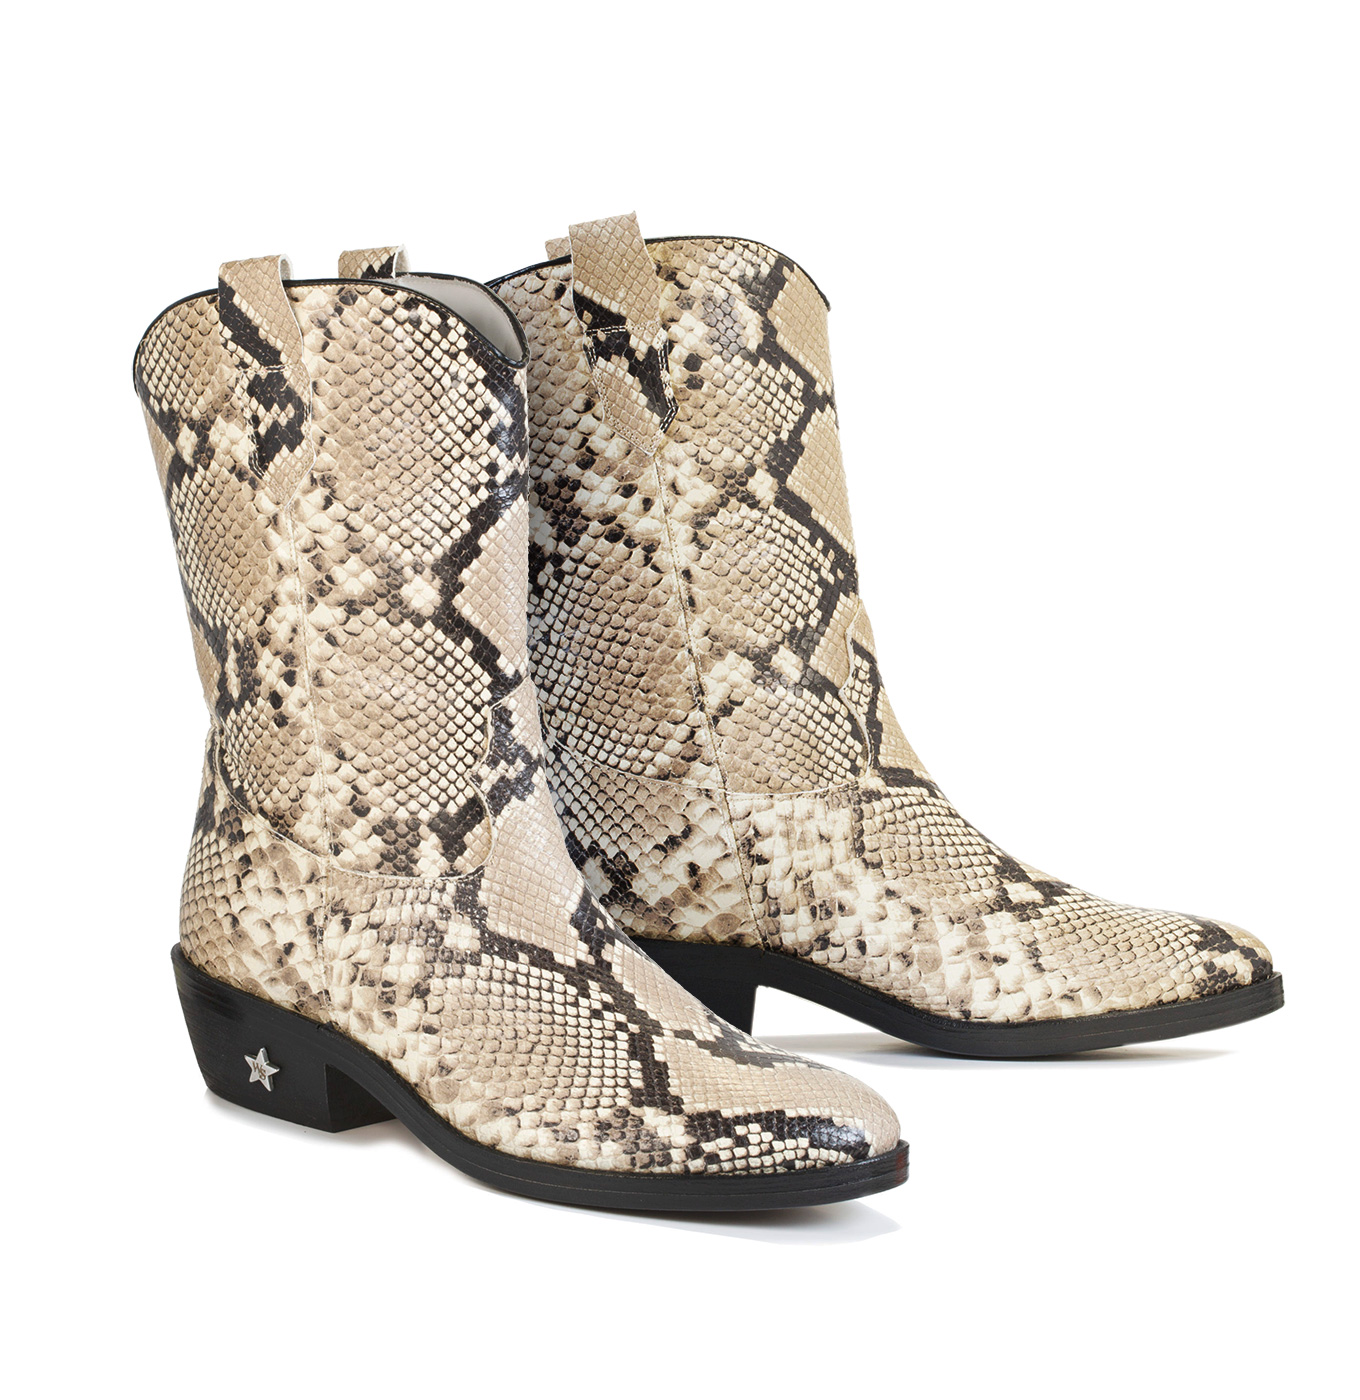 Snake leather Boots